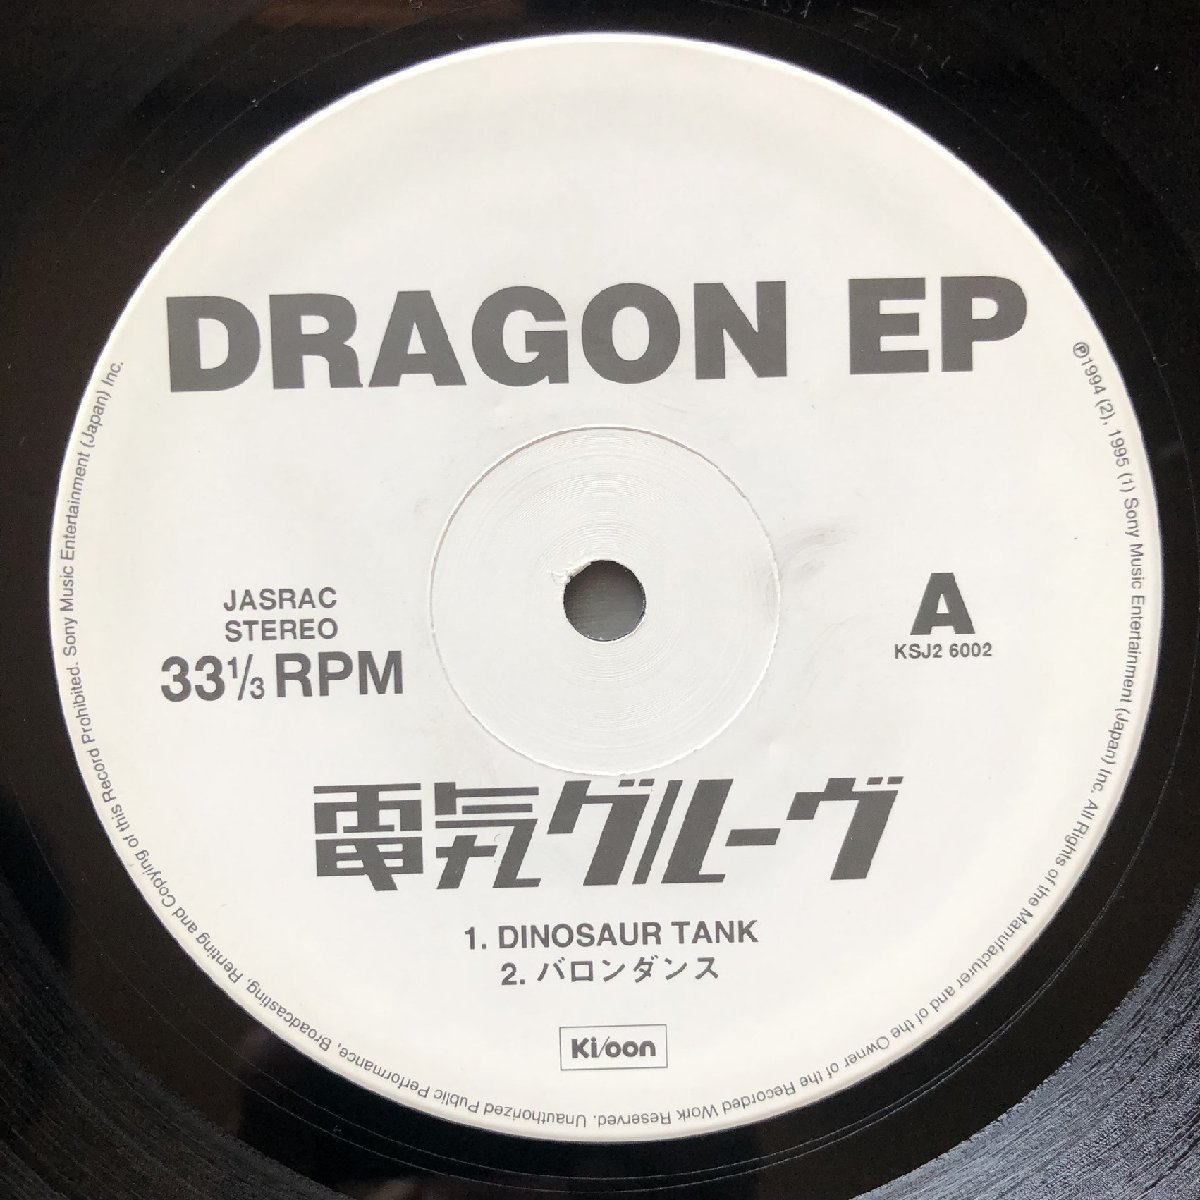  beautiful record good jacket 1995 year Denki Groove Denki Groove LP record Dragon EP Dragon EP Techno Techno Electro stone . ping-pong Pierre .